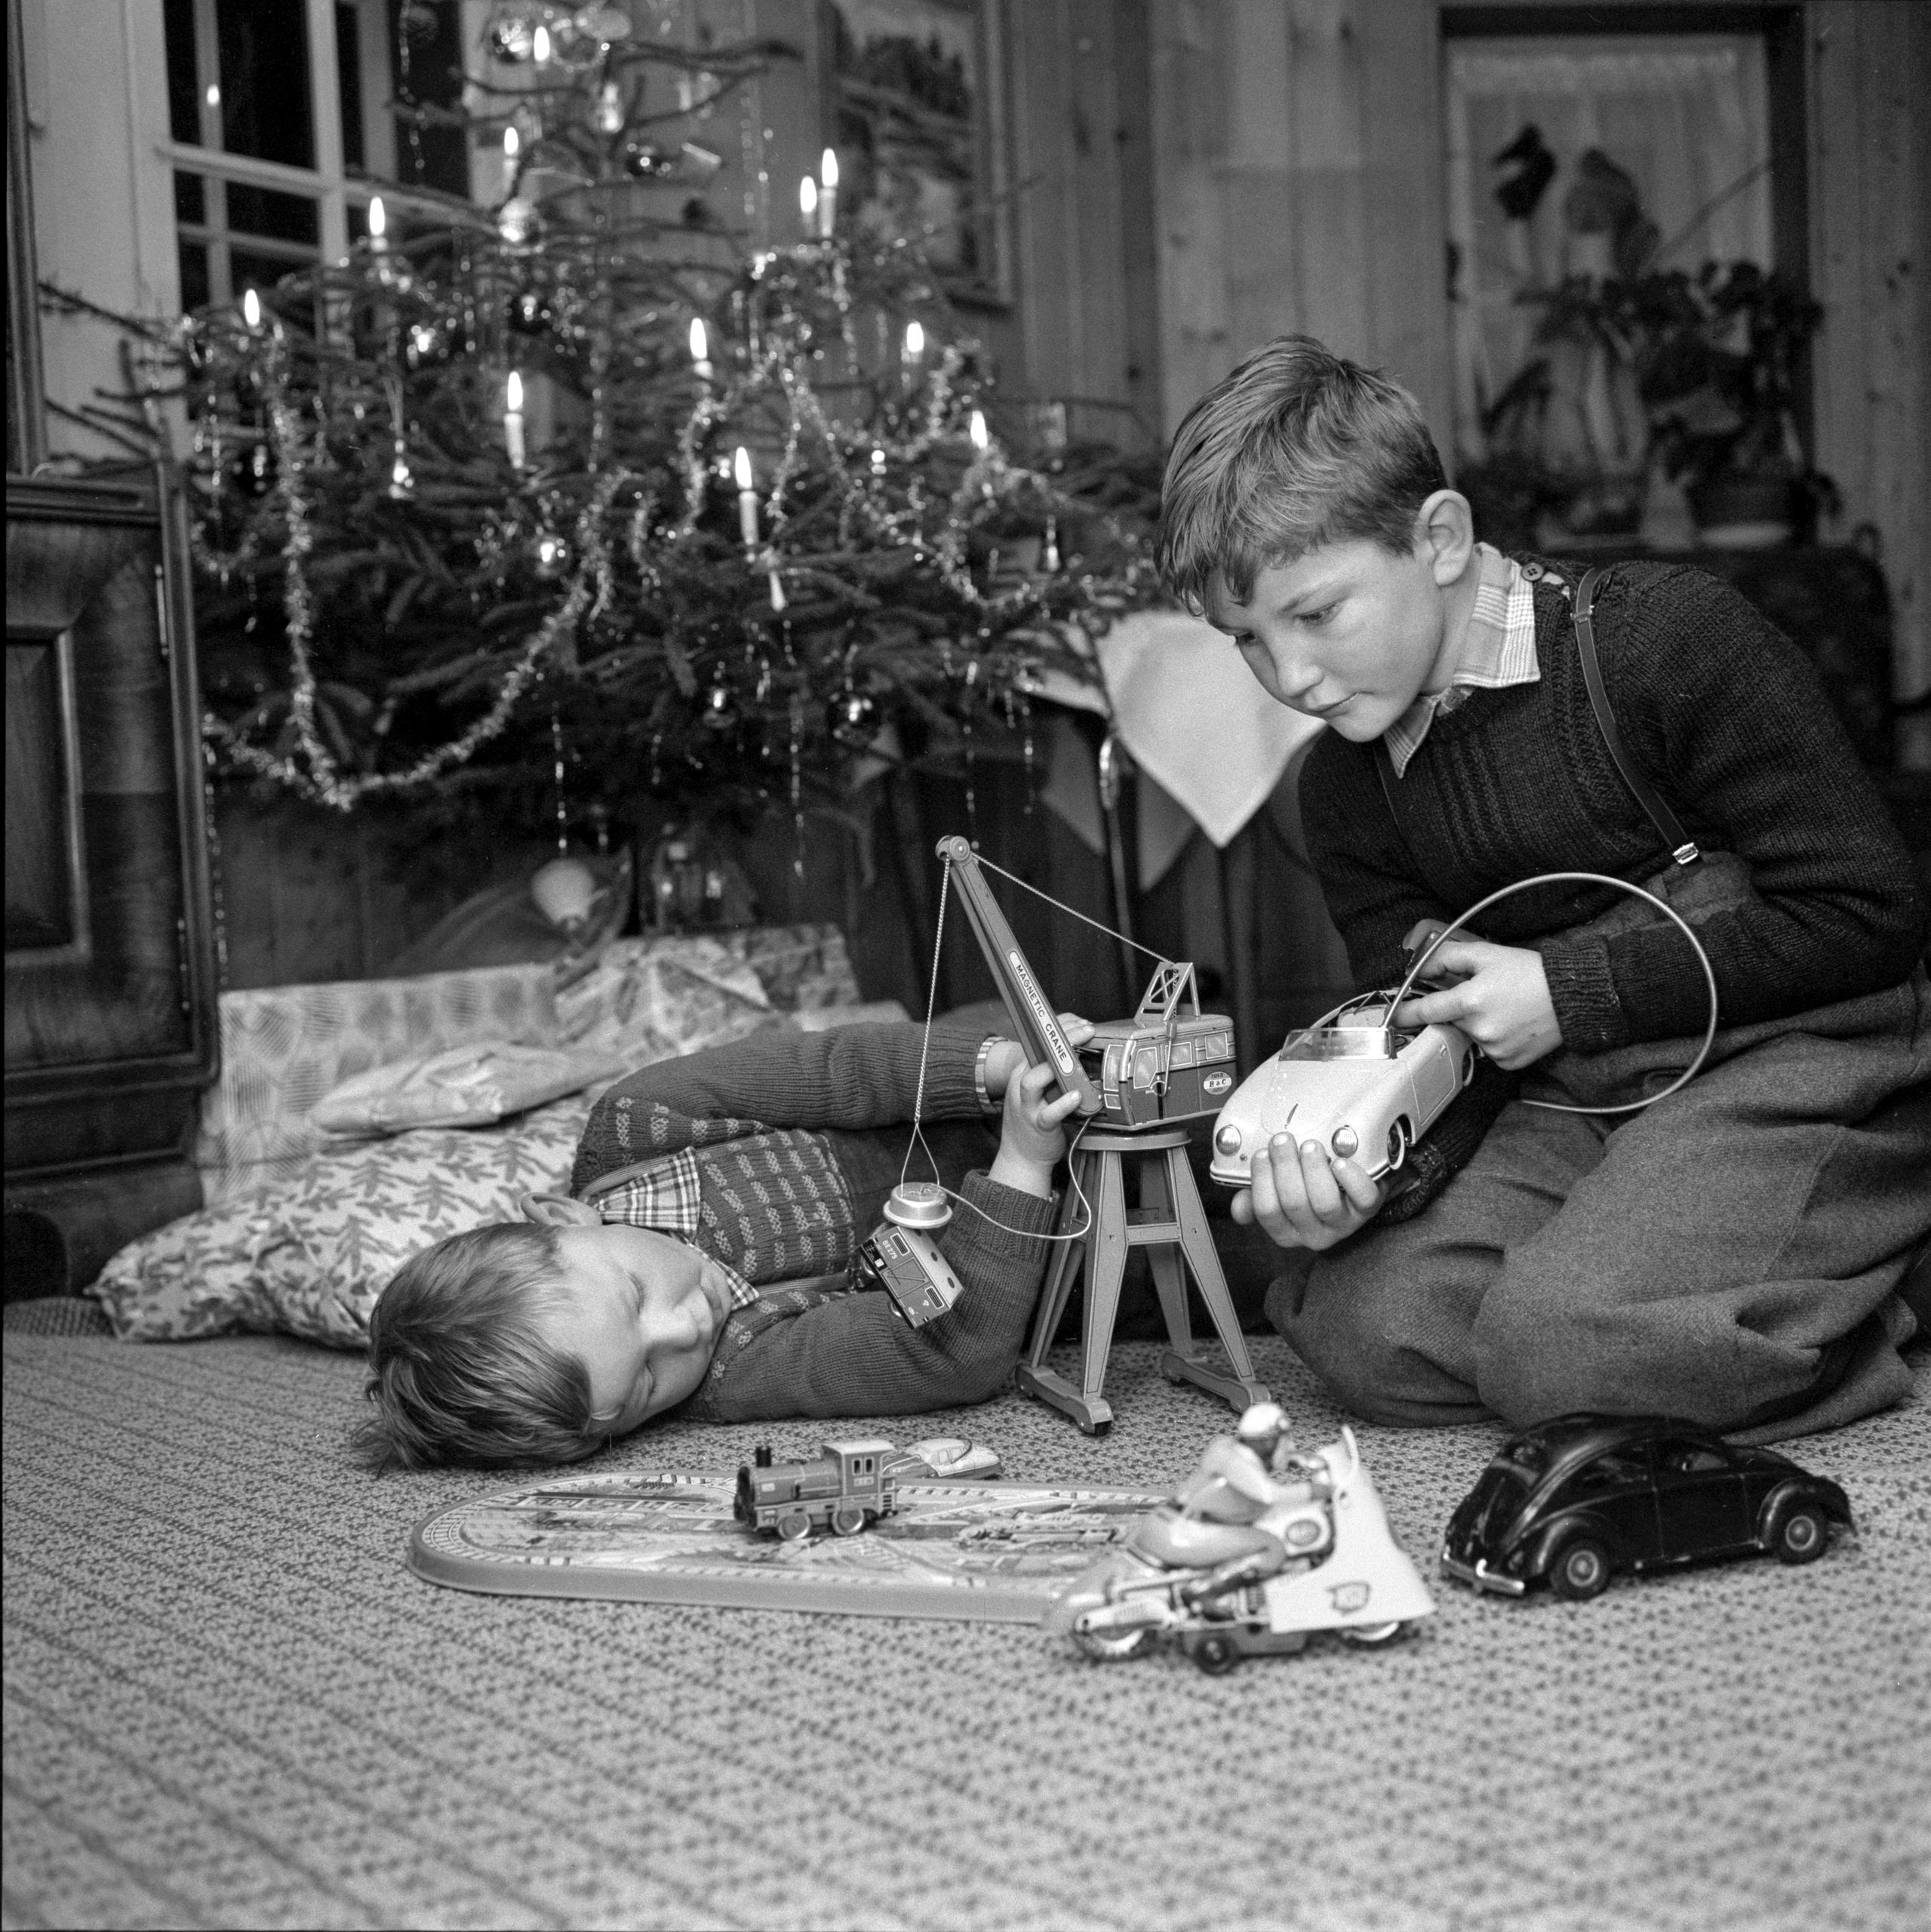 Two boys with their presents in front of a Christmas tree.